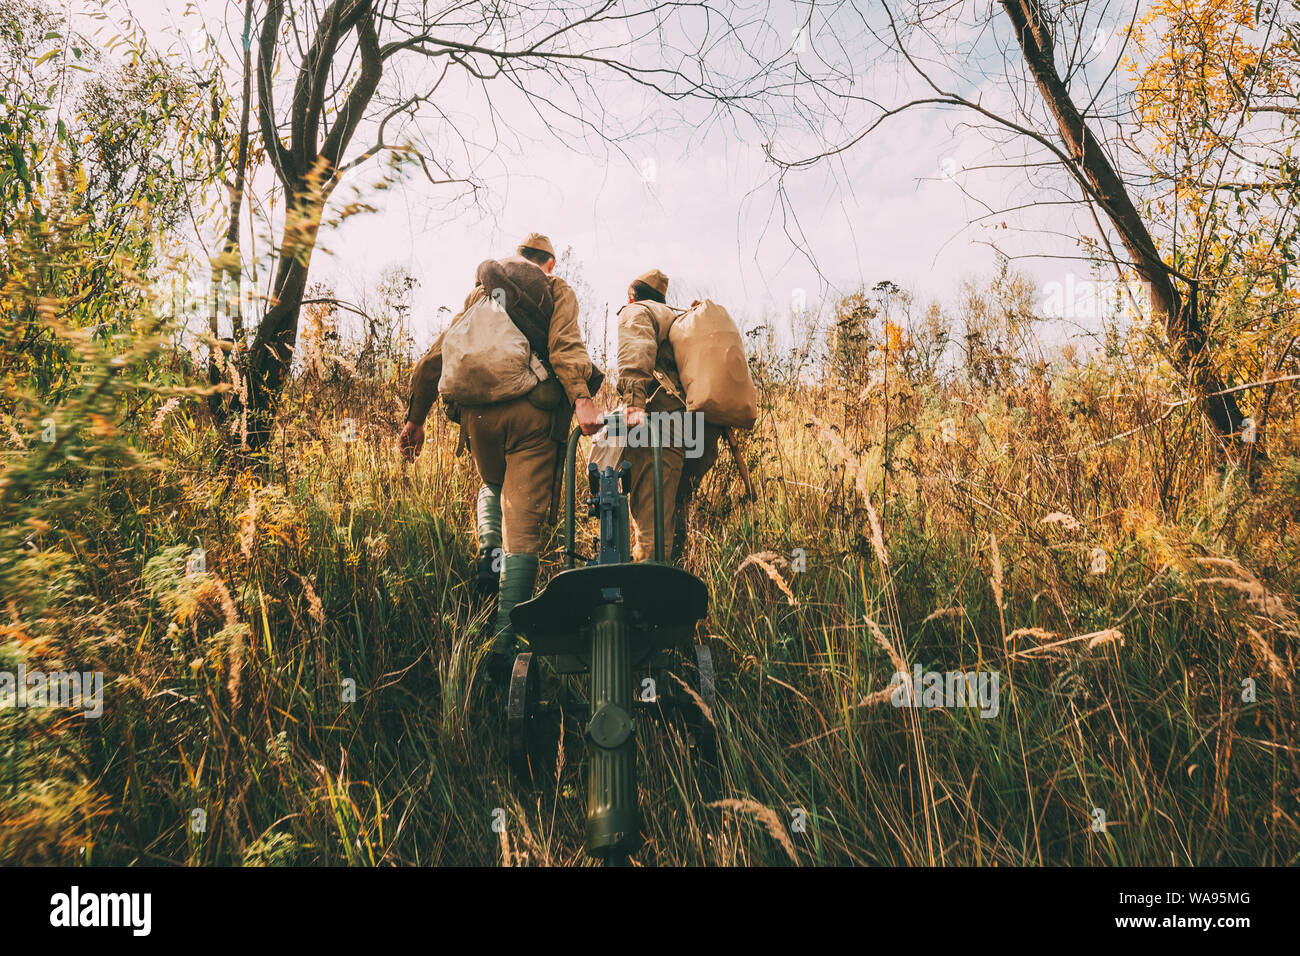 Two Reenactors Dressed As Russian Soviet Red Army Soldiers Of World War II Walking With With Maxim's Machine Gun Weapon In Autumn Meadow, Forest Stock Photo